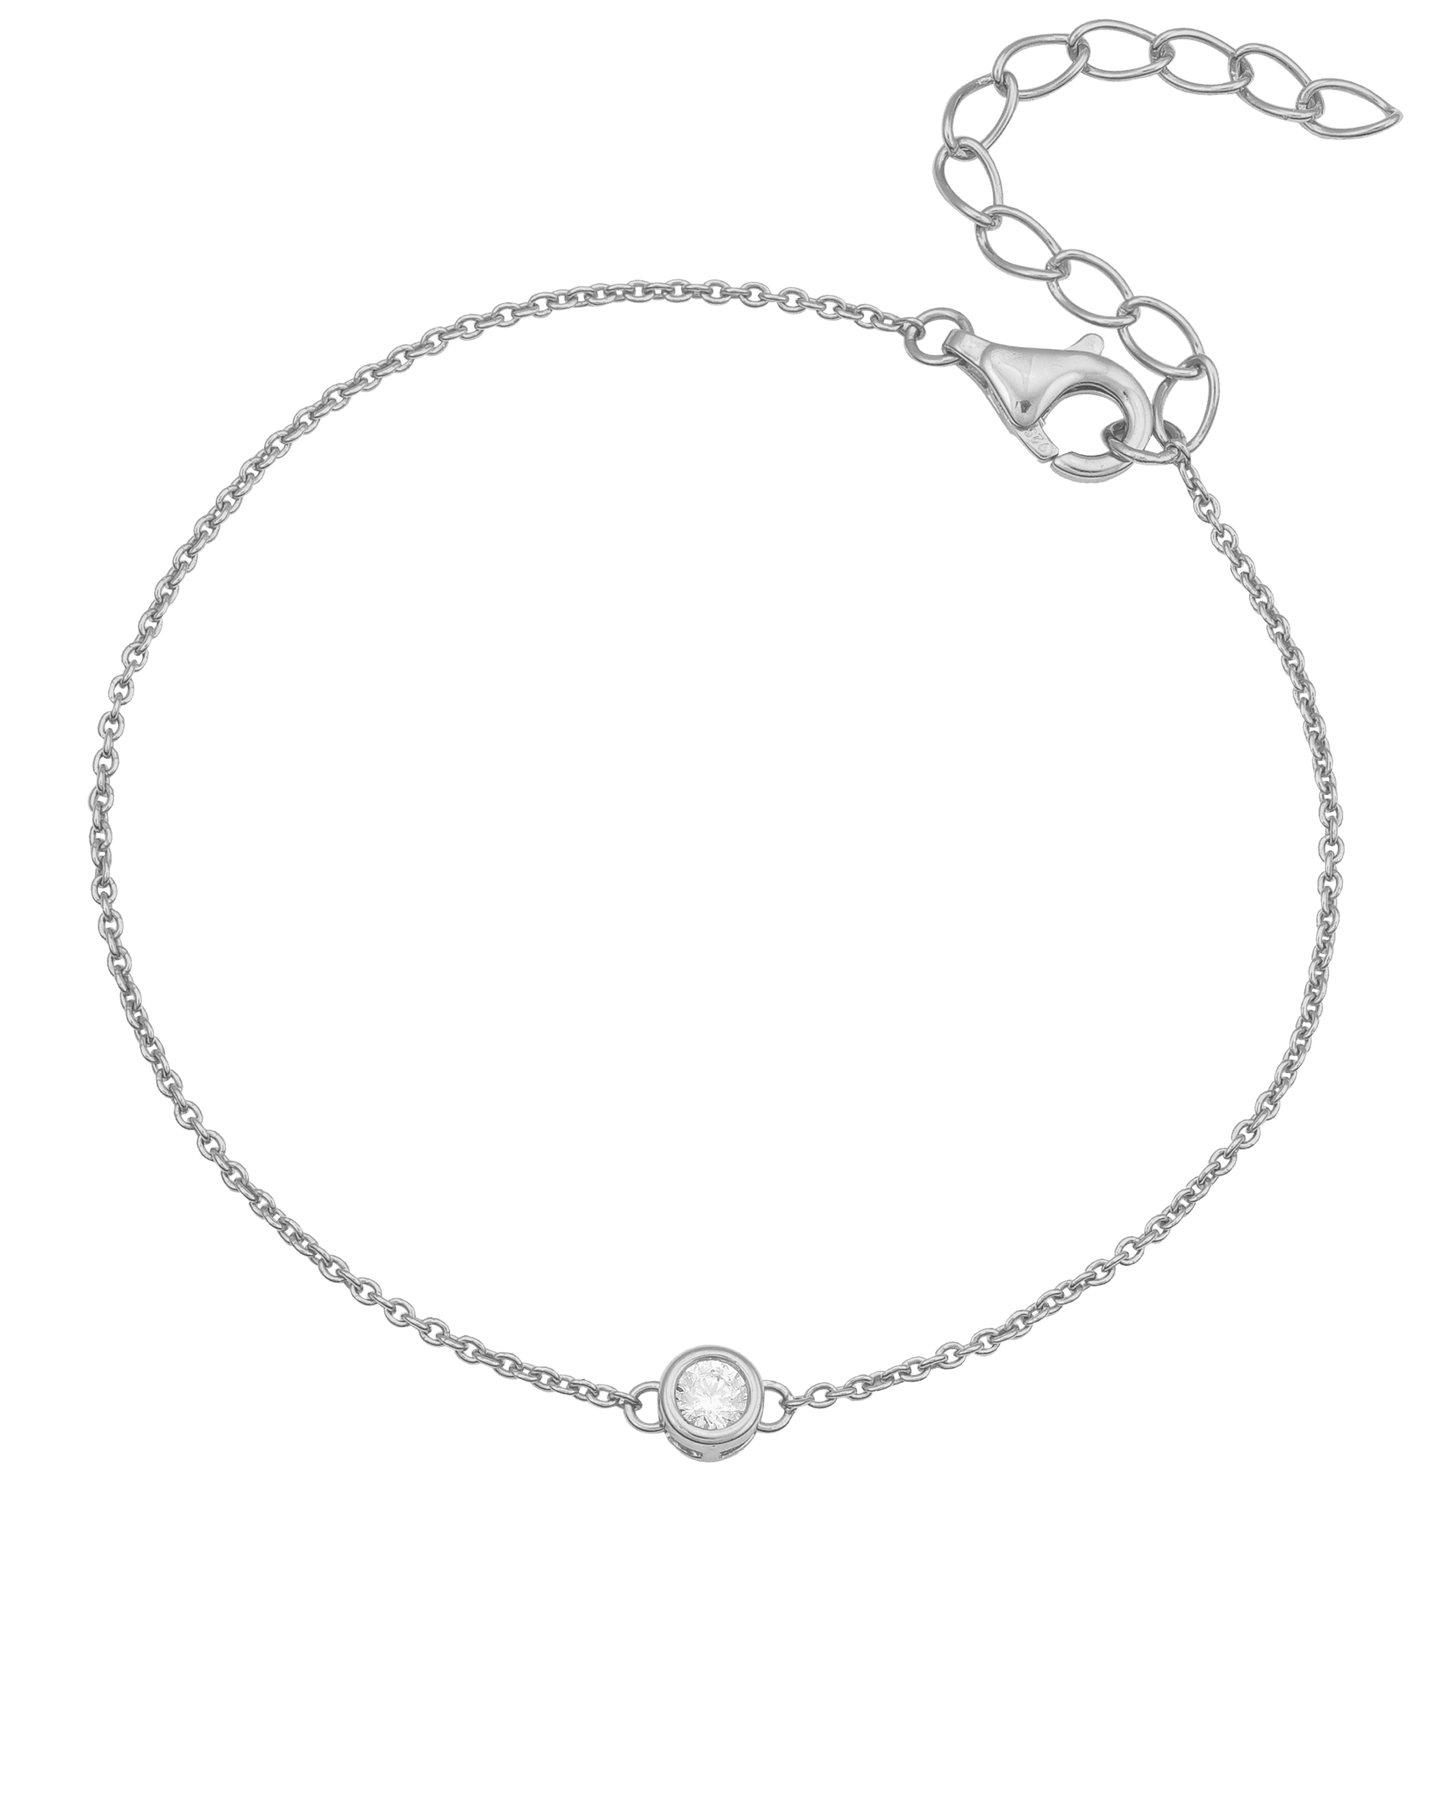 Chain of Love - 925 Sterling Silver